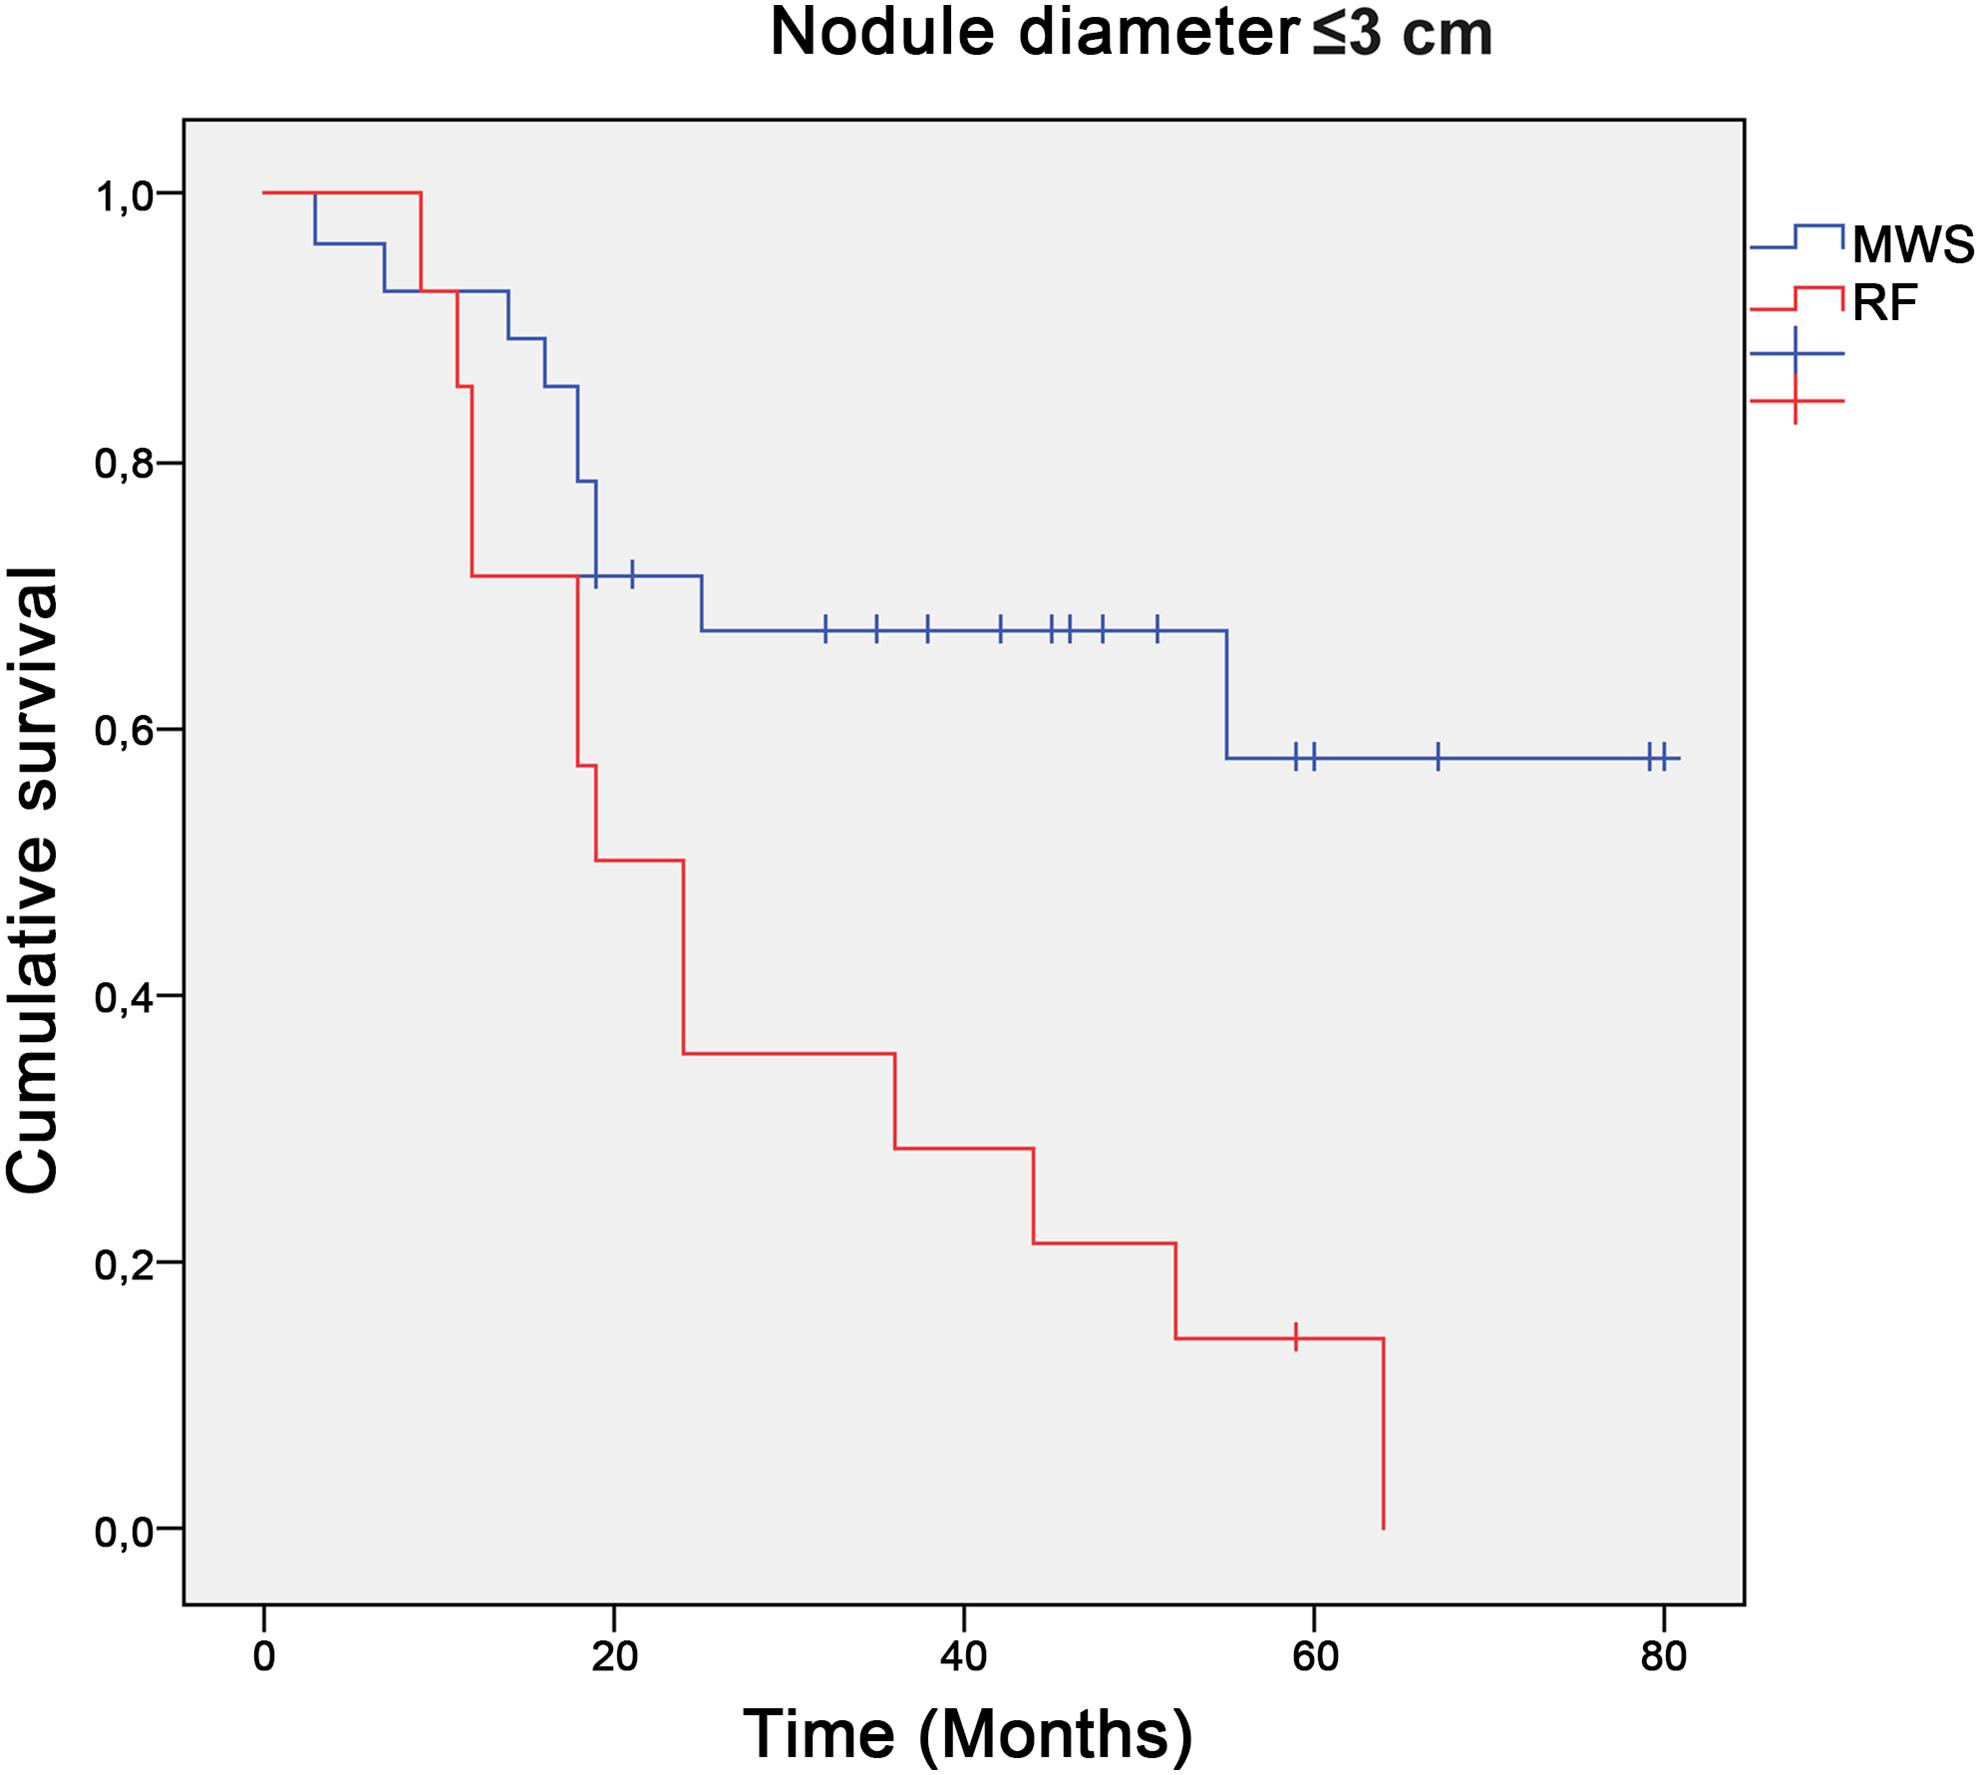 Overall survival of patients with nodules ≤3 cm treated with MWSA vs. patients treated with RFA.